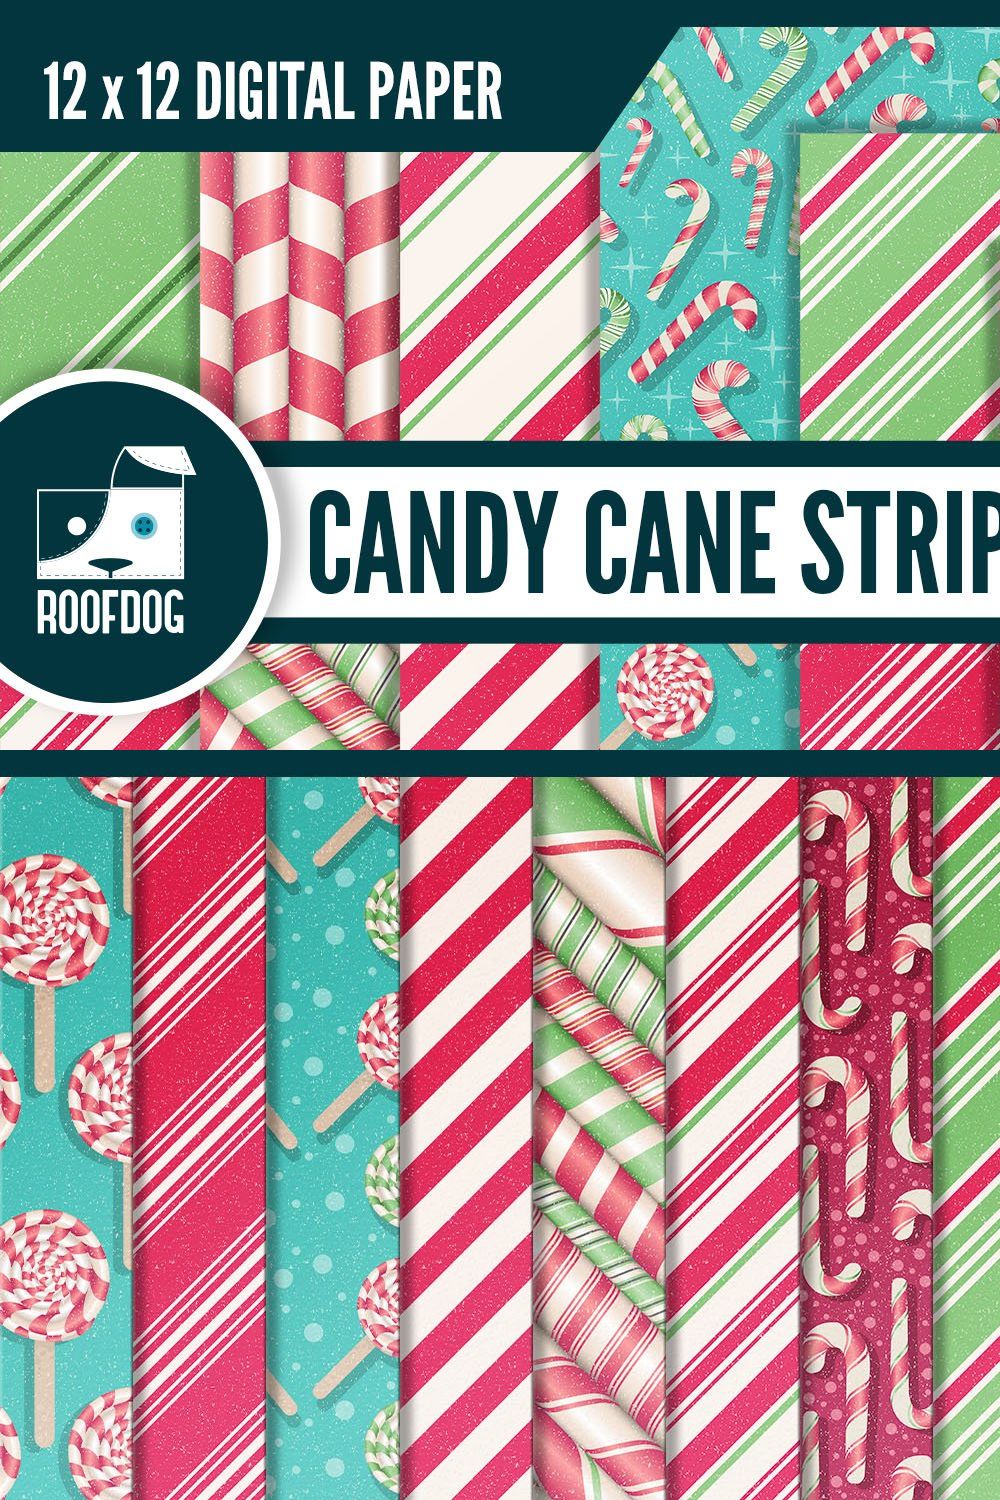 Candy cane stripe digital paper pinterest preview image.